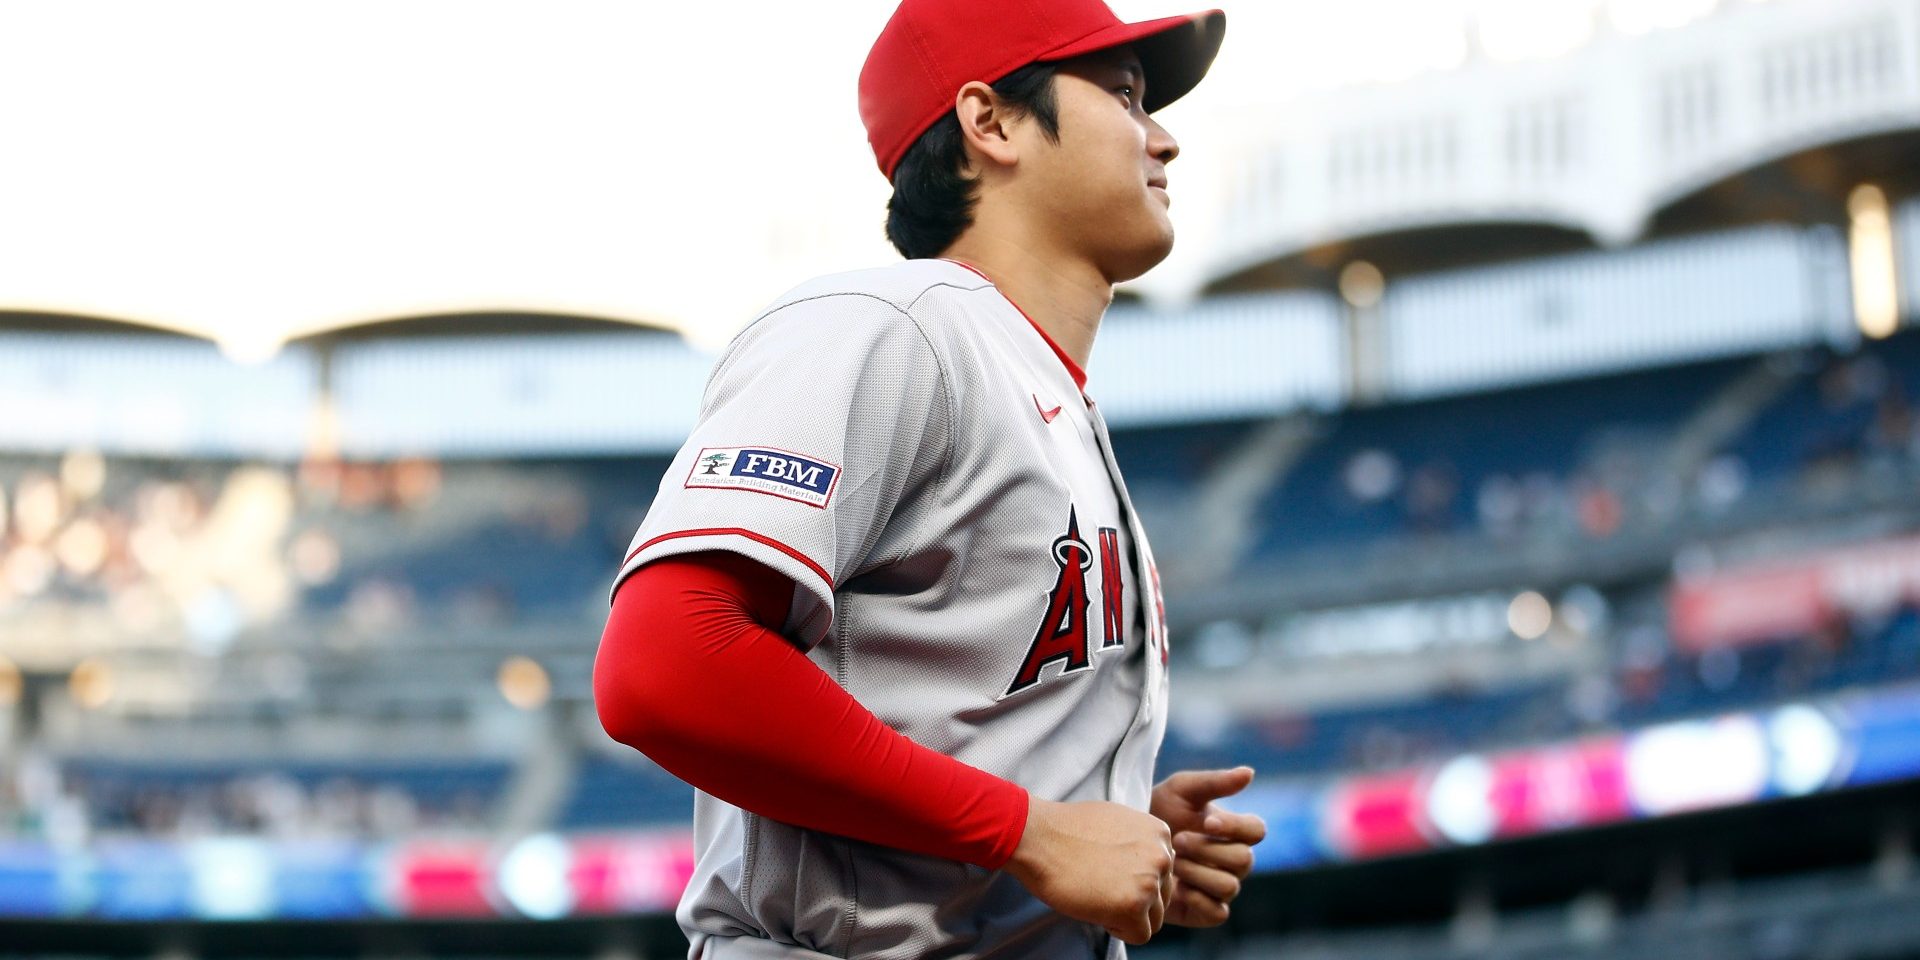 Shohei Ohtani's visit to Mets will not be the late summer showcase either side was hoping for